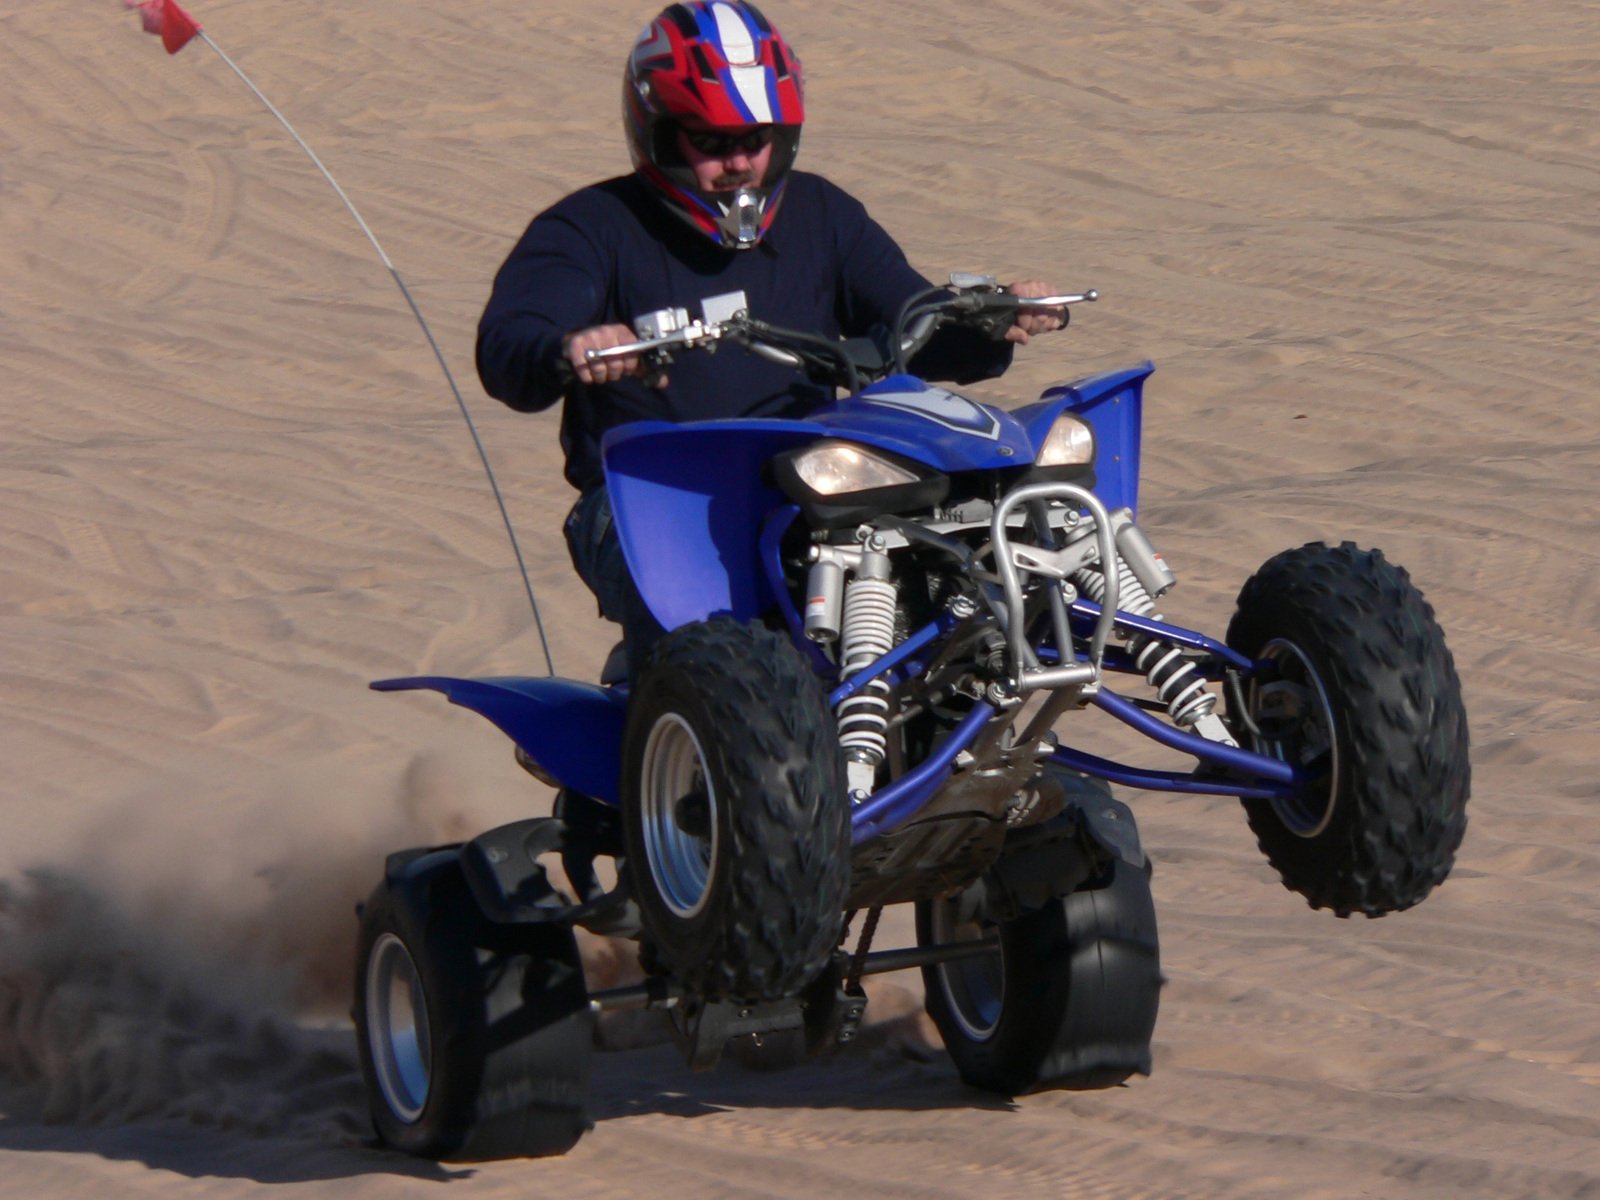 a man on an atv riding in the sand